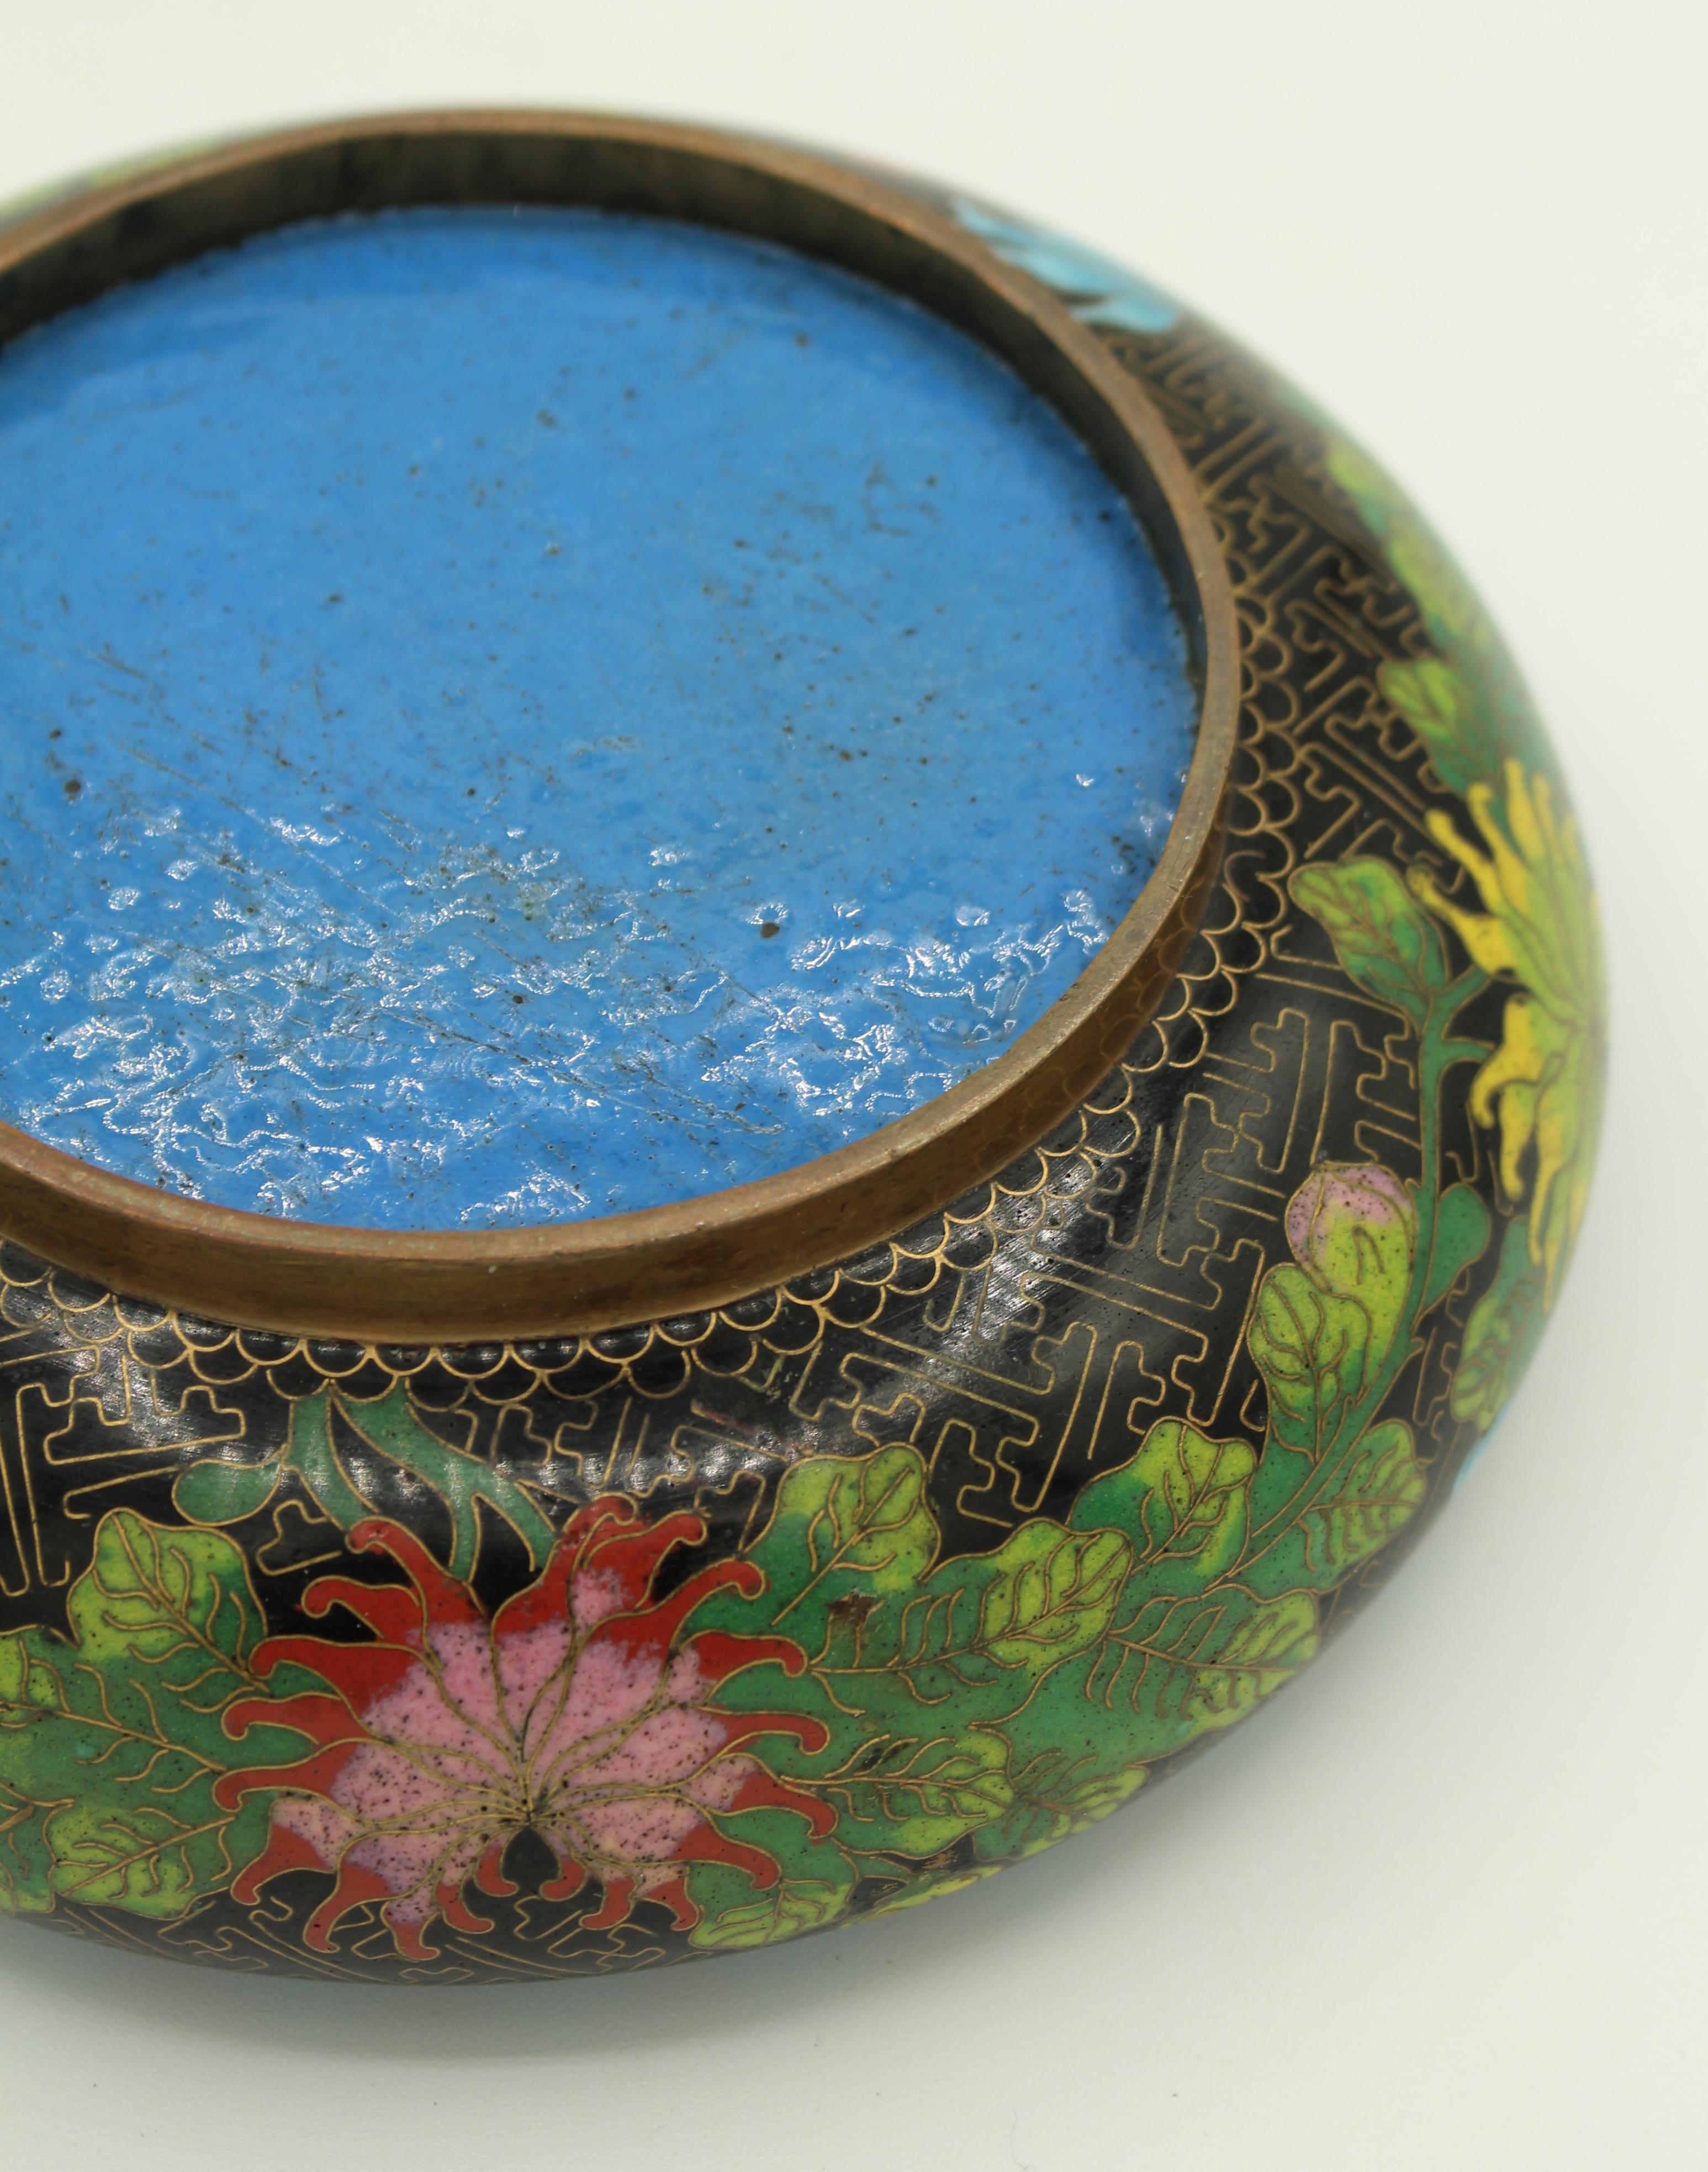 Circa 1900 Qing Dynasty Cloisonne Bowl For Sale 1